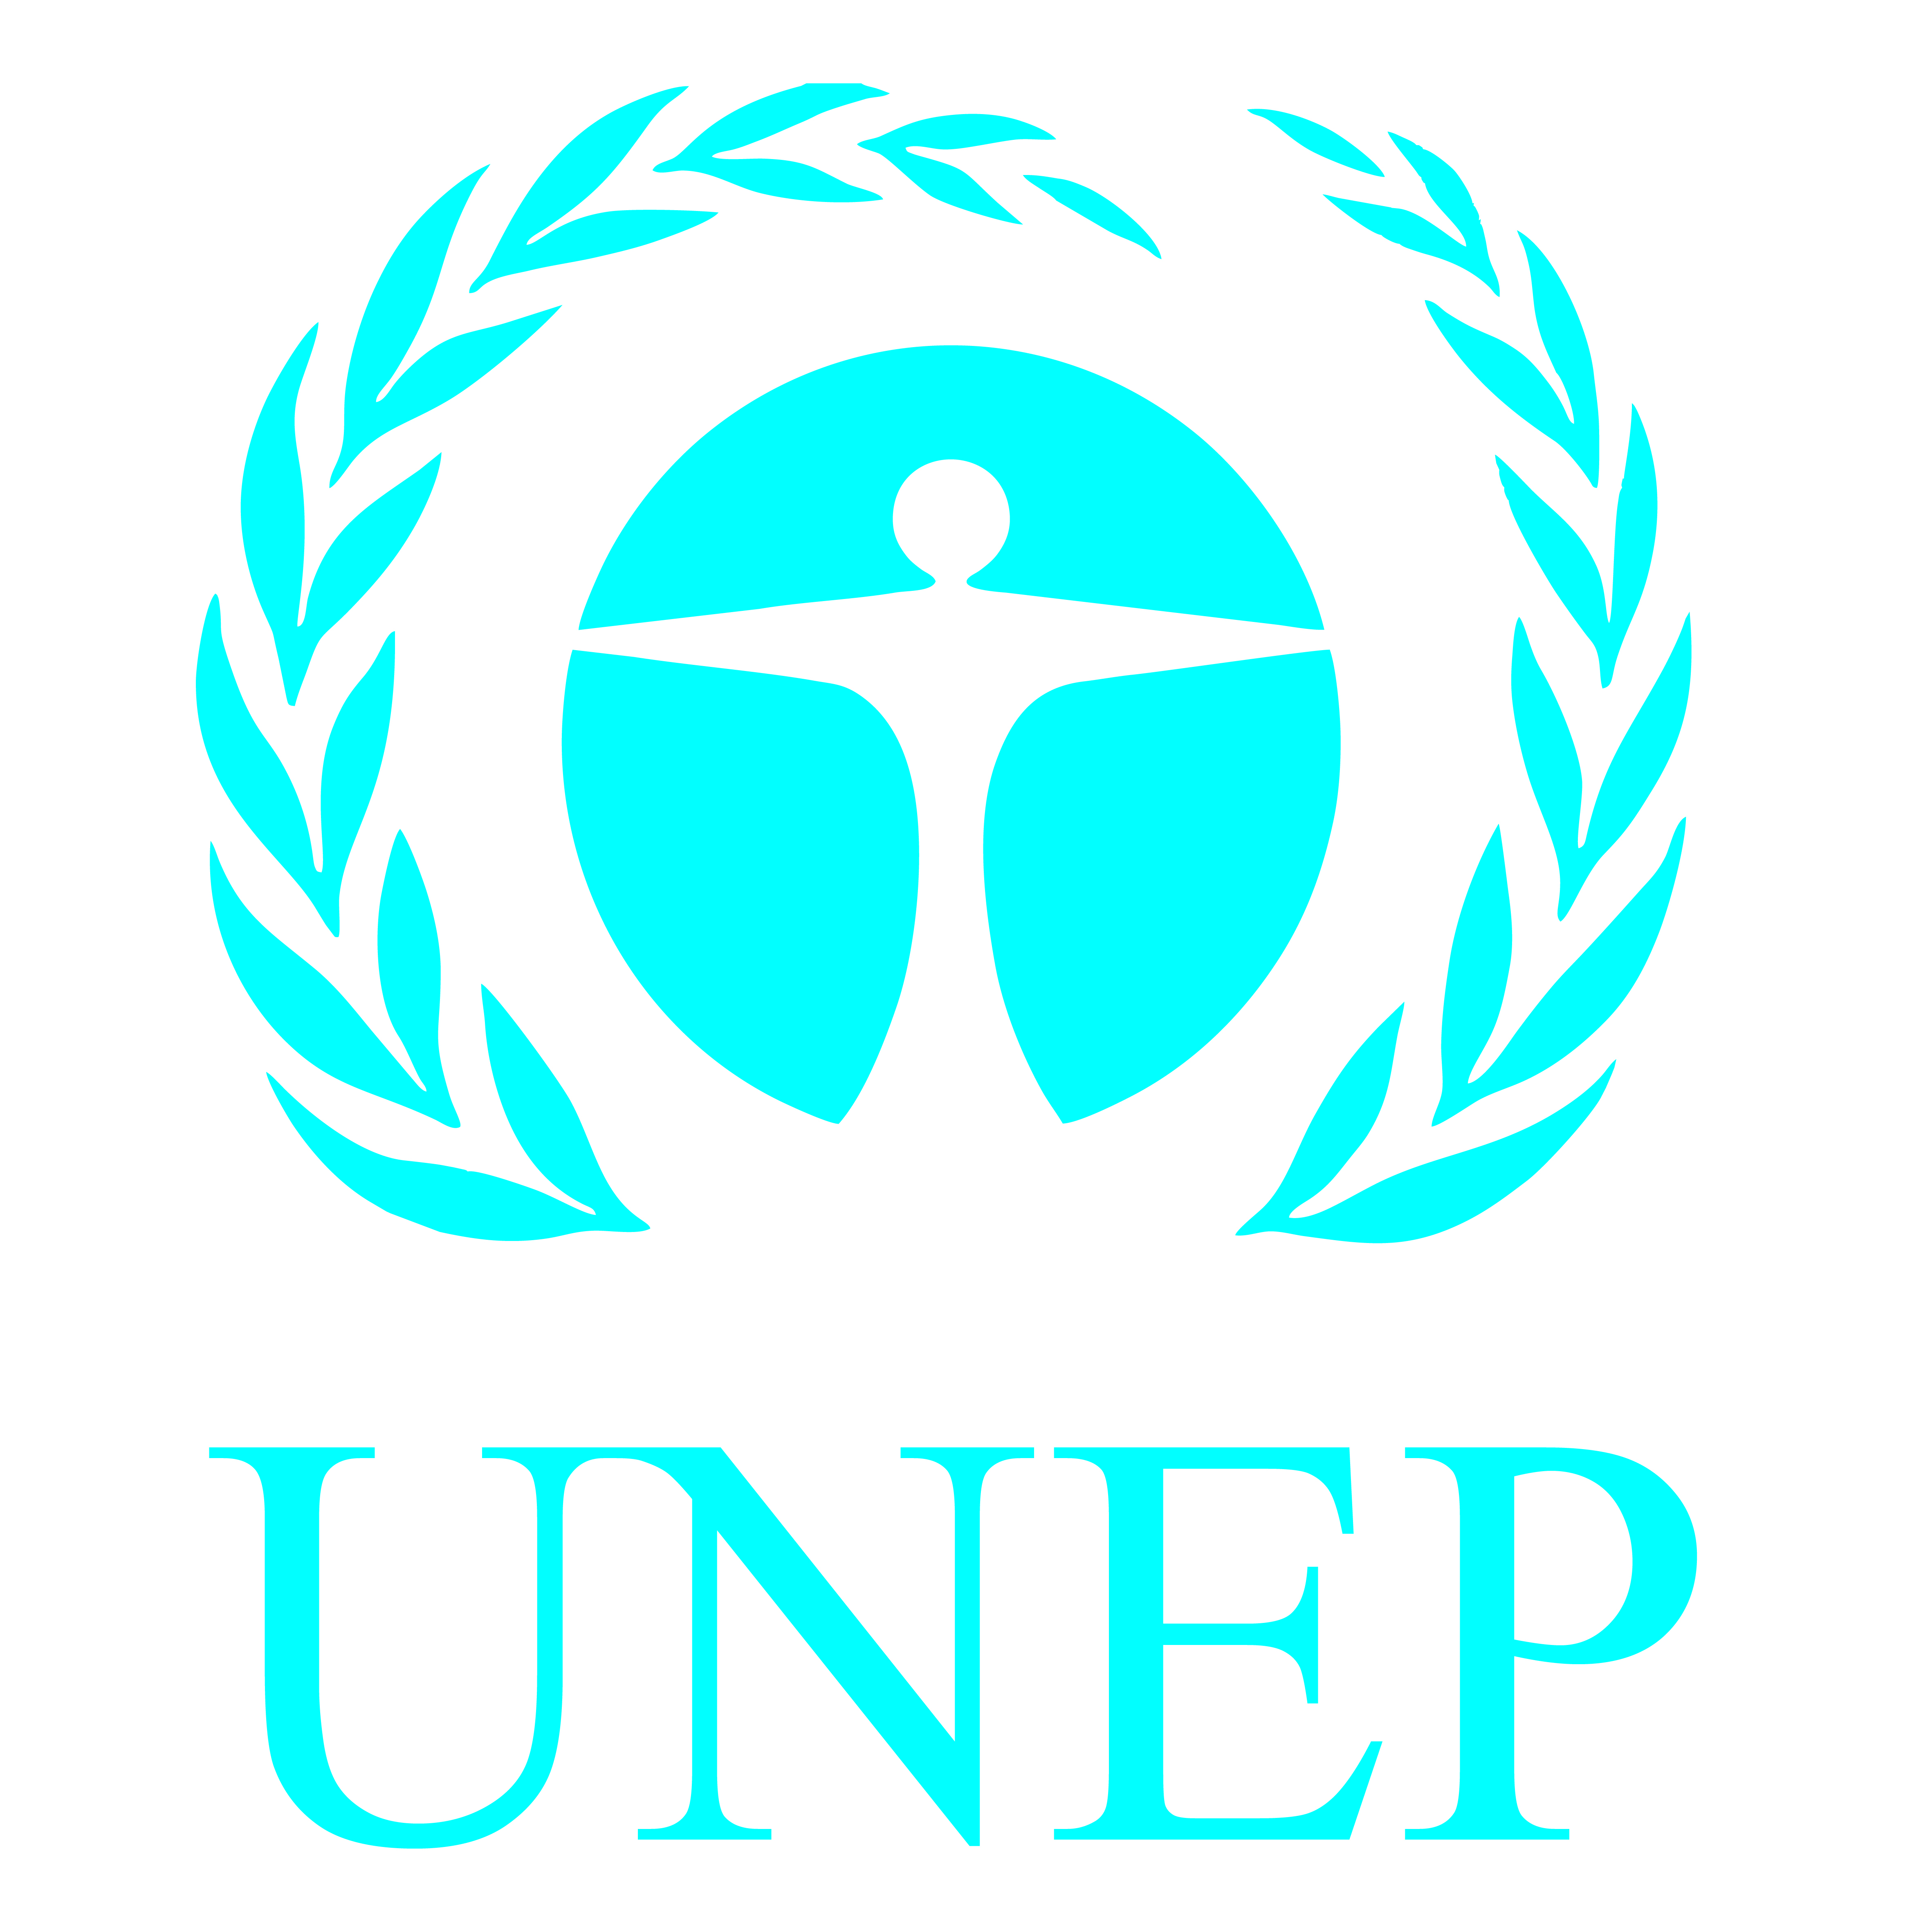 UNEP Strengthened and Upgraded to Implement The Future We Want 